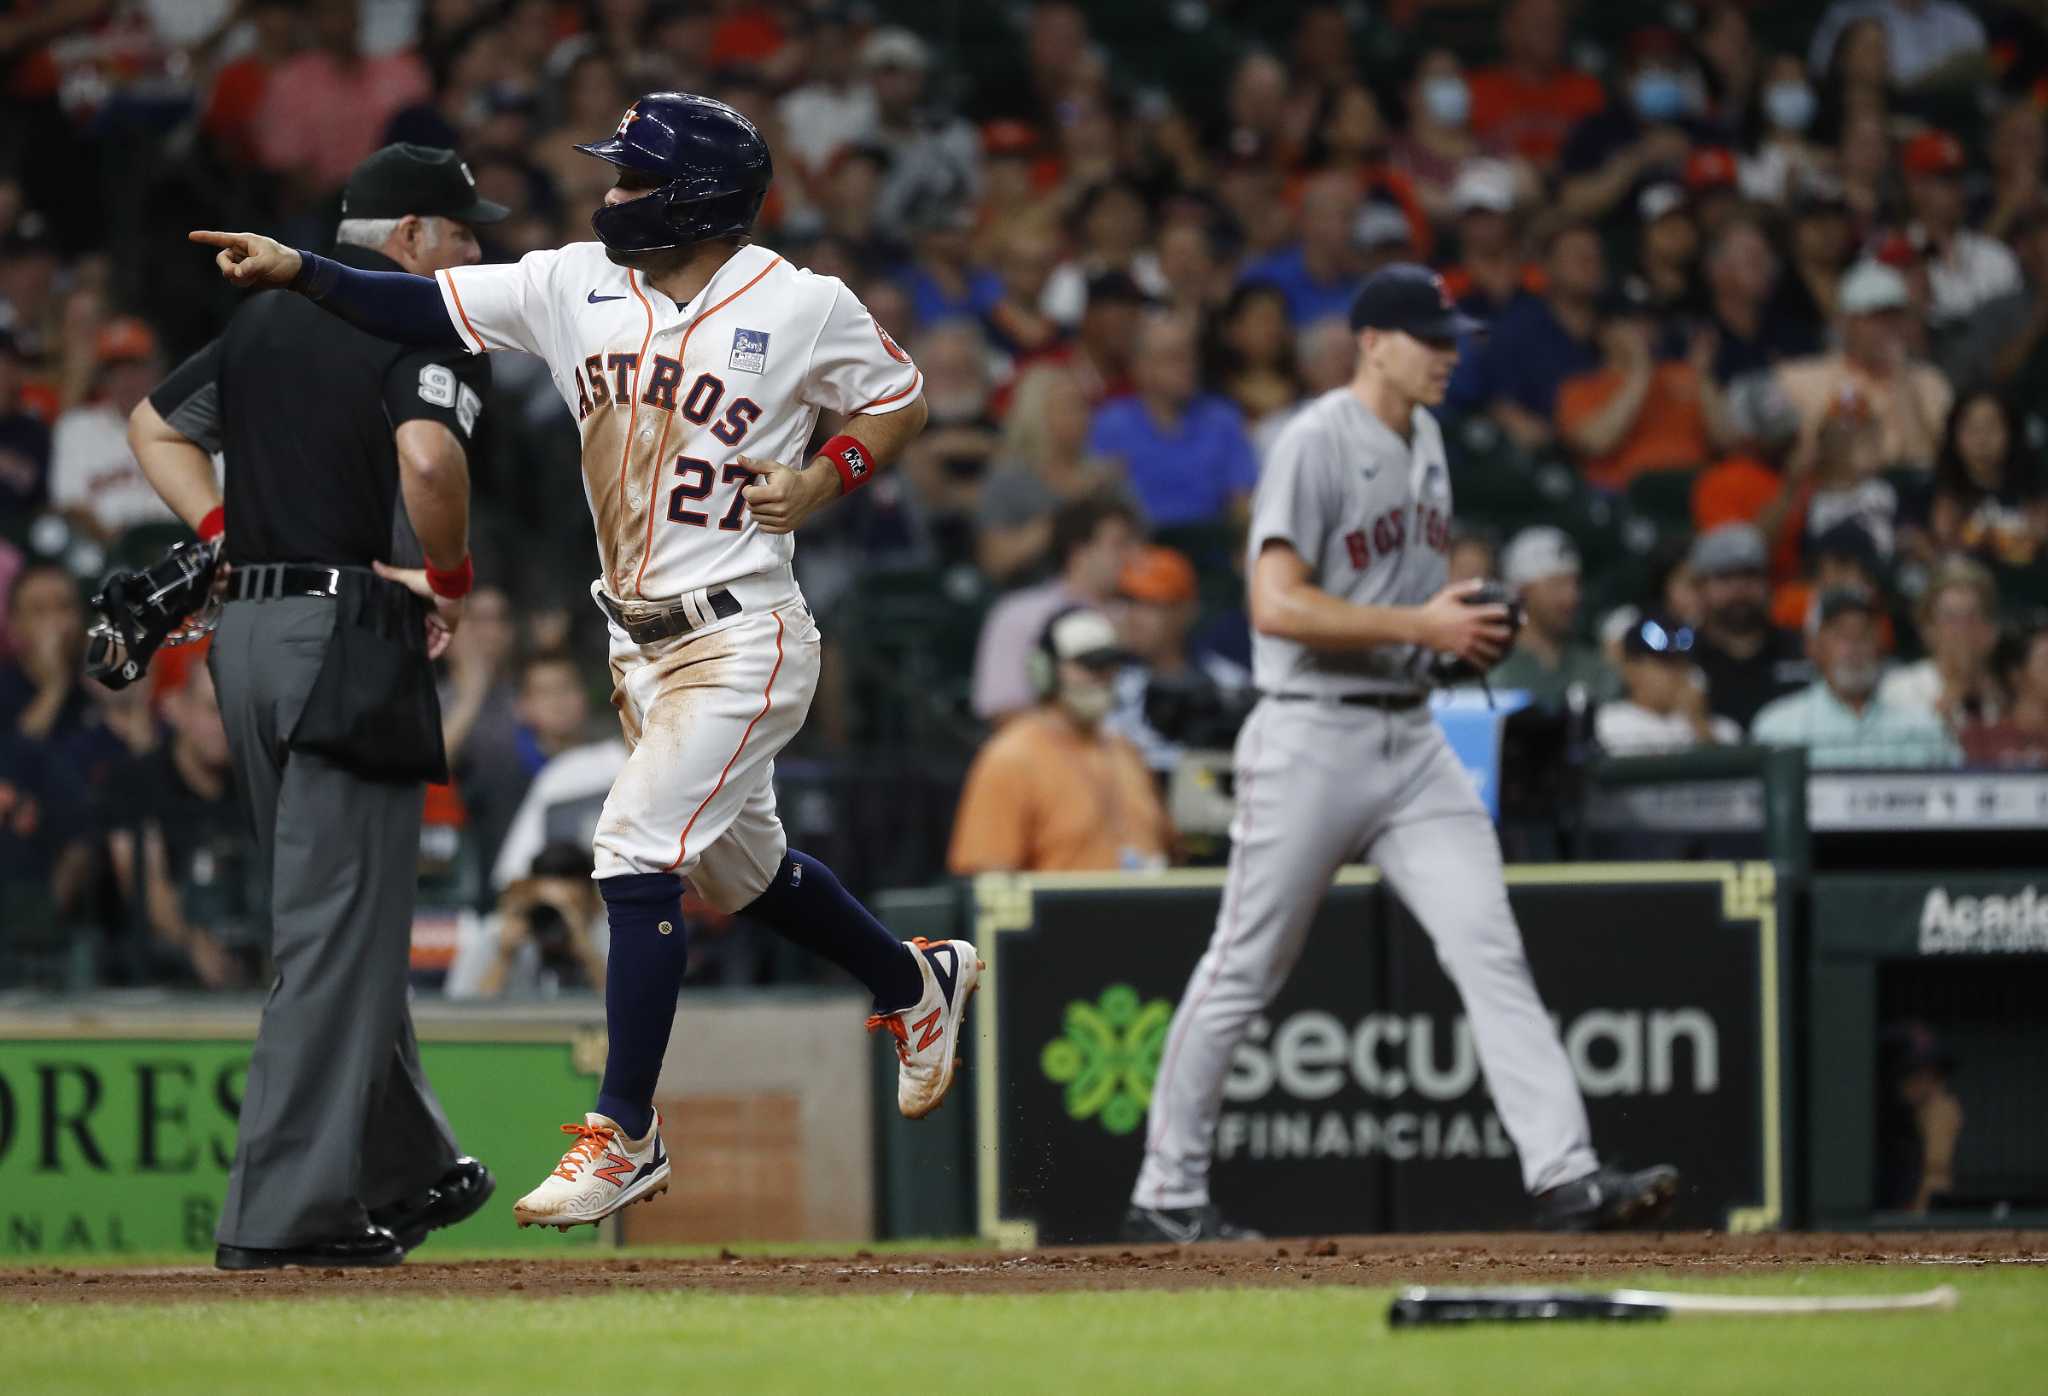 Red Sox 4, Astros 5: Red Sox end their season in heartbreaking